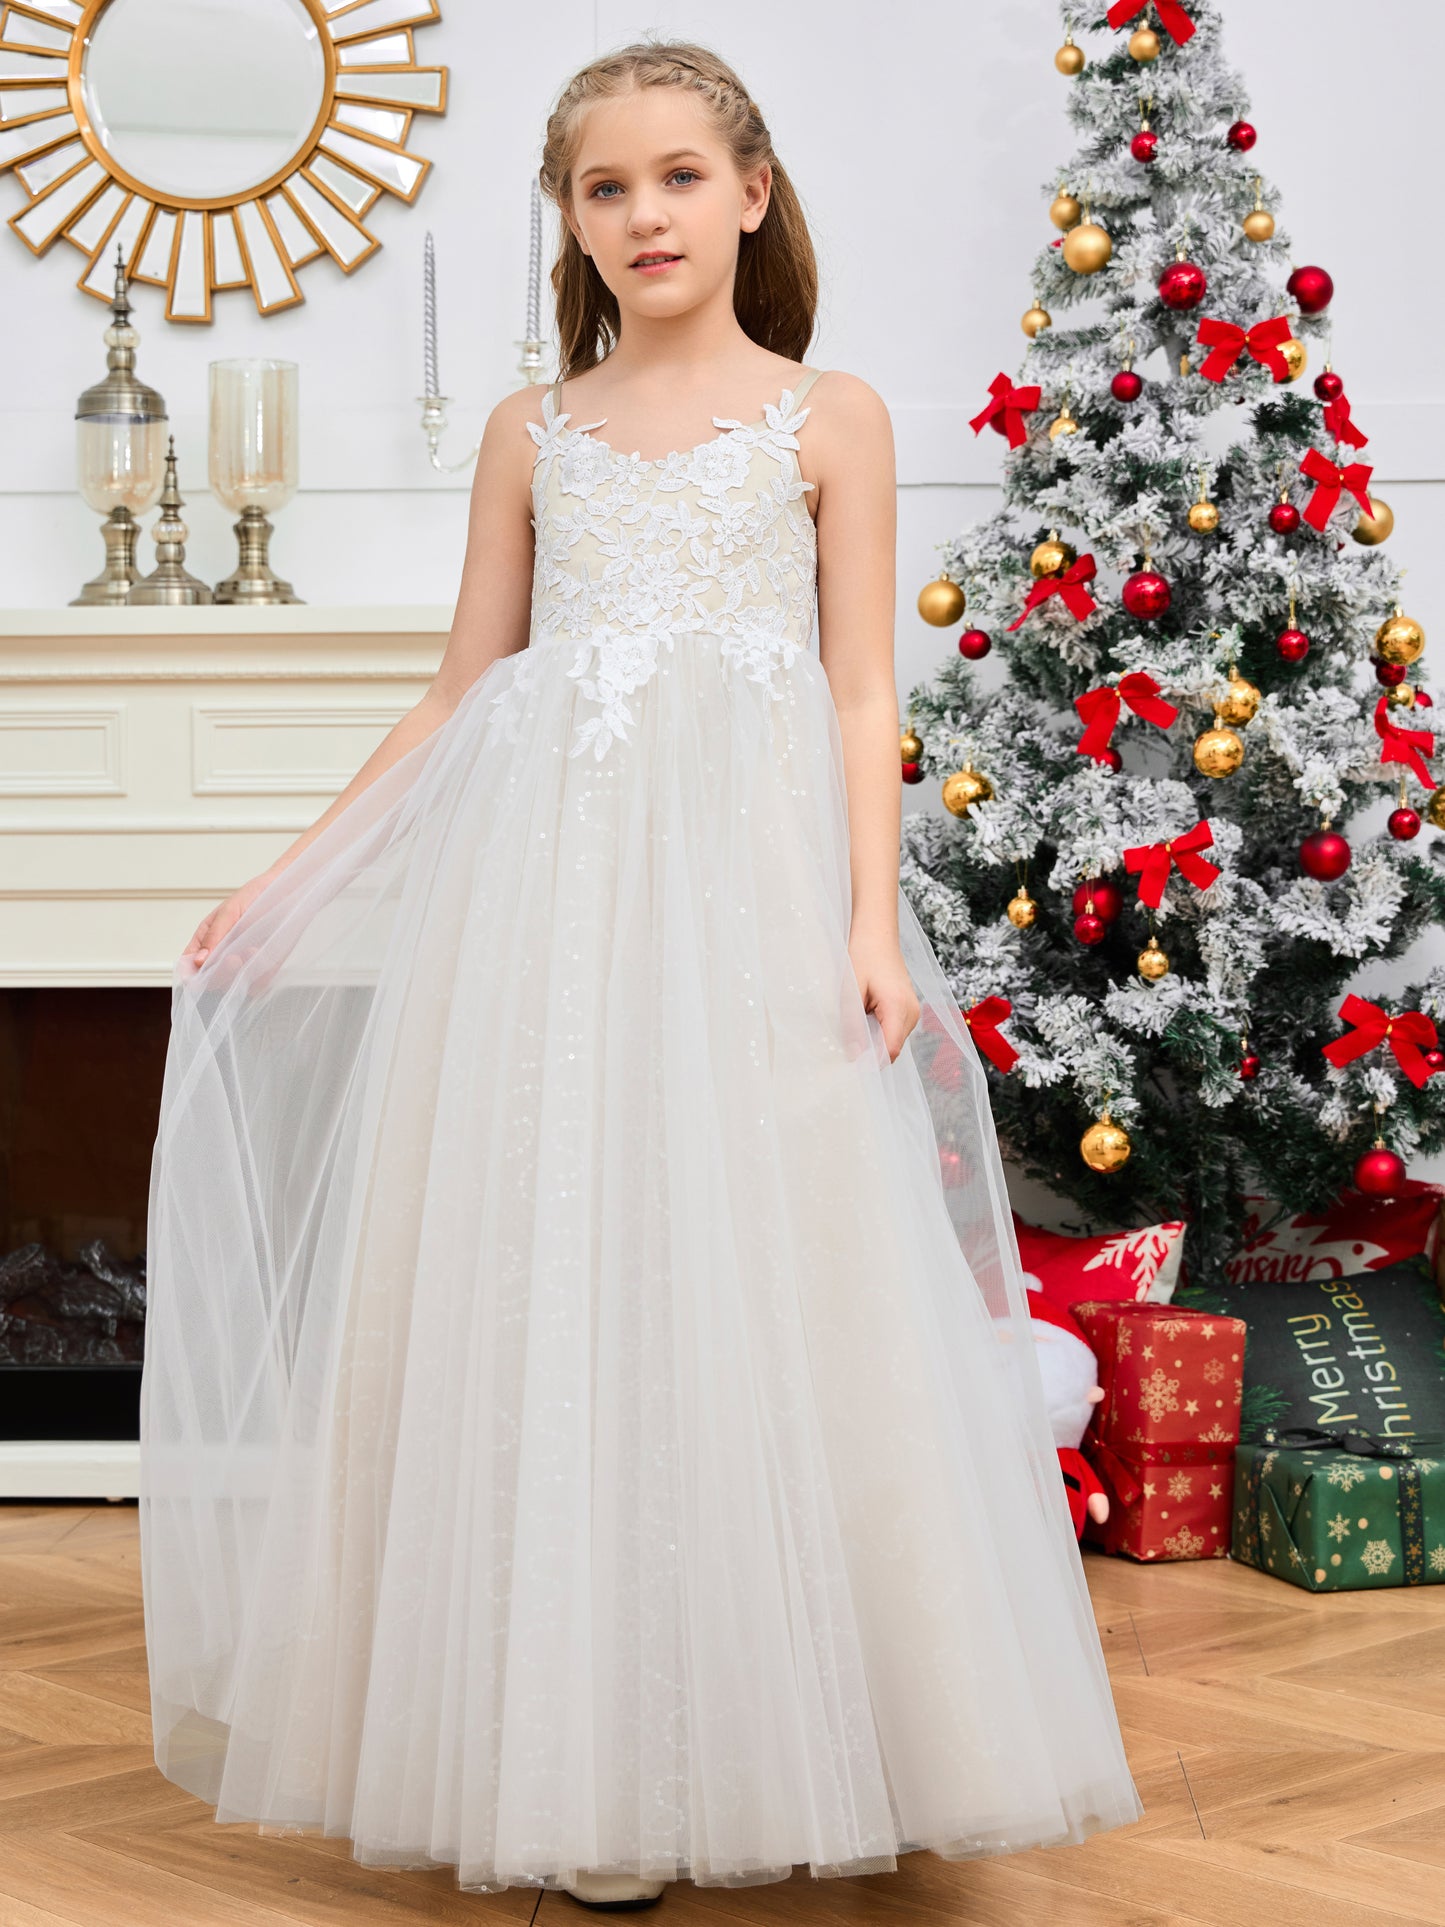 Spaghetti Straps Appliques Tulle Flower Girl Dress with Bow-Knot